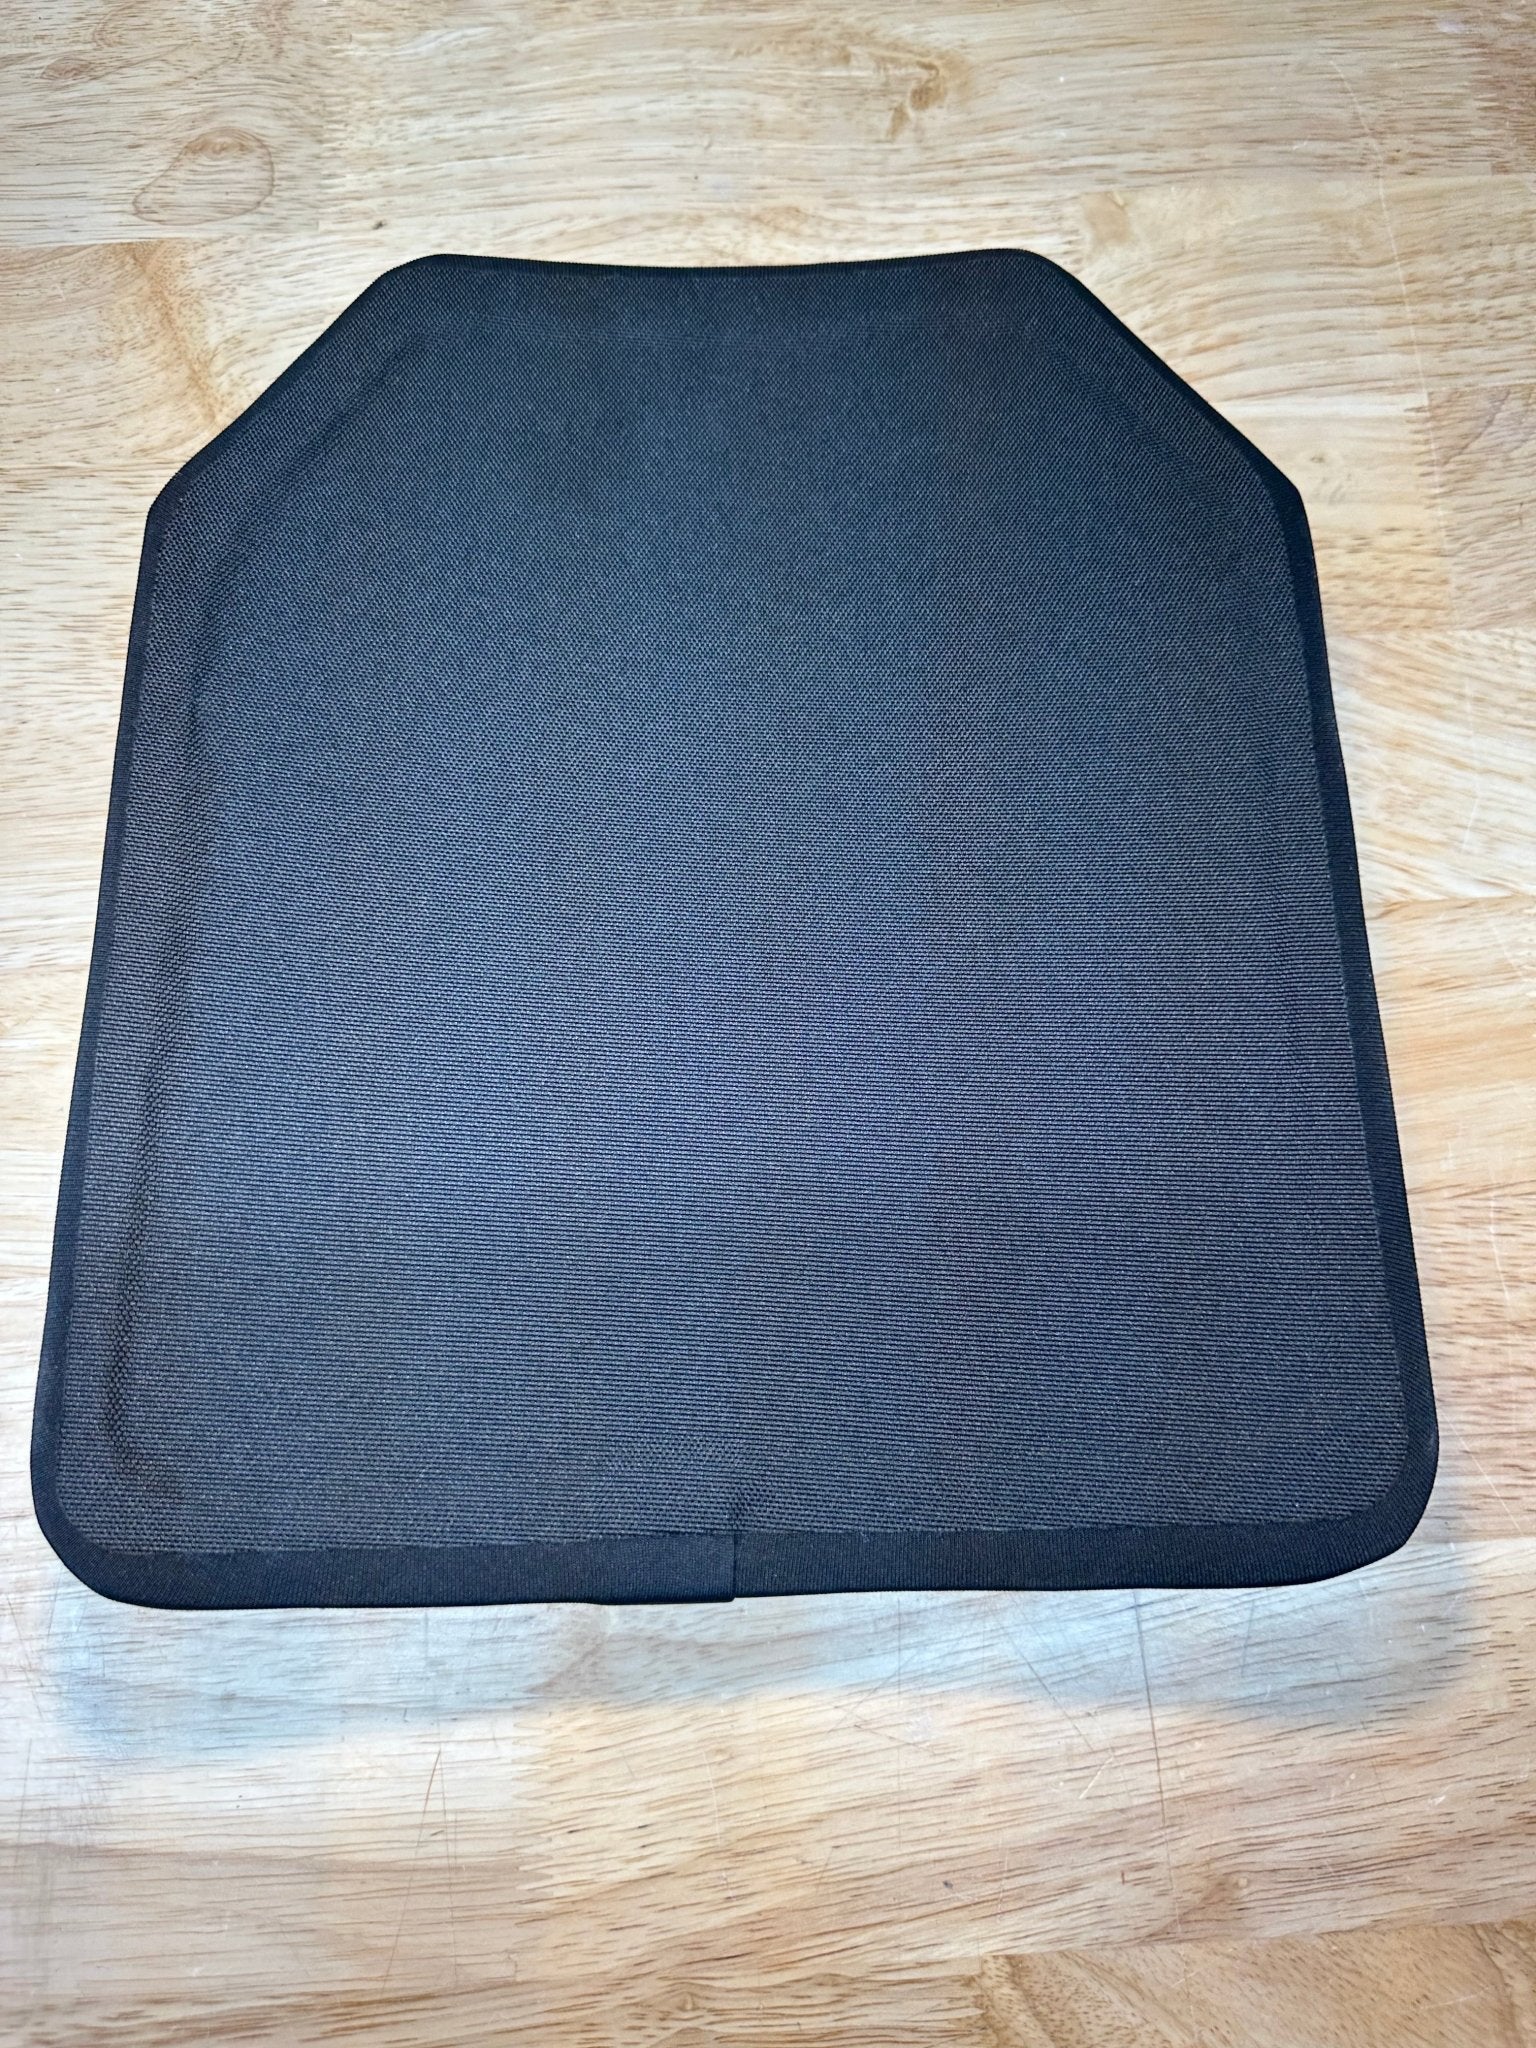 GTS Only 6 pounds! RF2 (Level 3+), 10"x12" Full Coverage Mosaic Silicon Carbide Ceramic Ballistic Rifle Plate - Gilliam Technical Services, Inc.